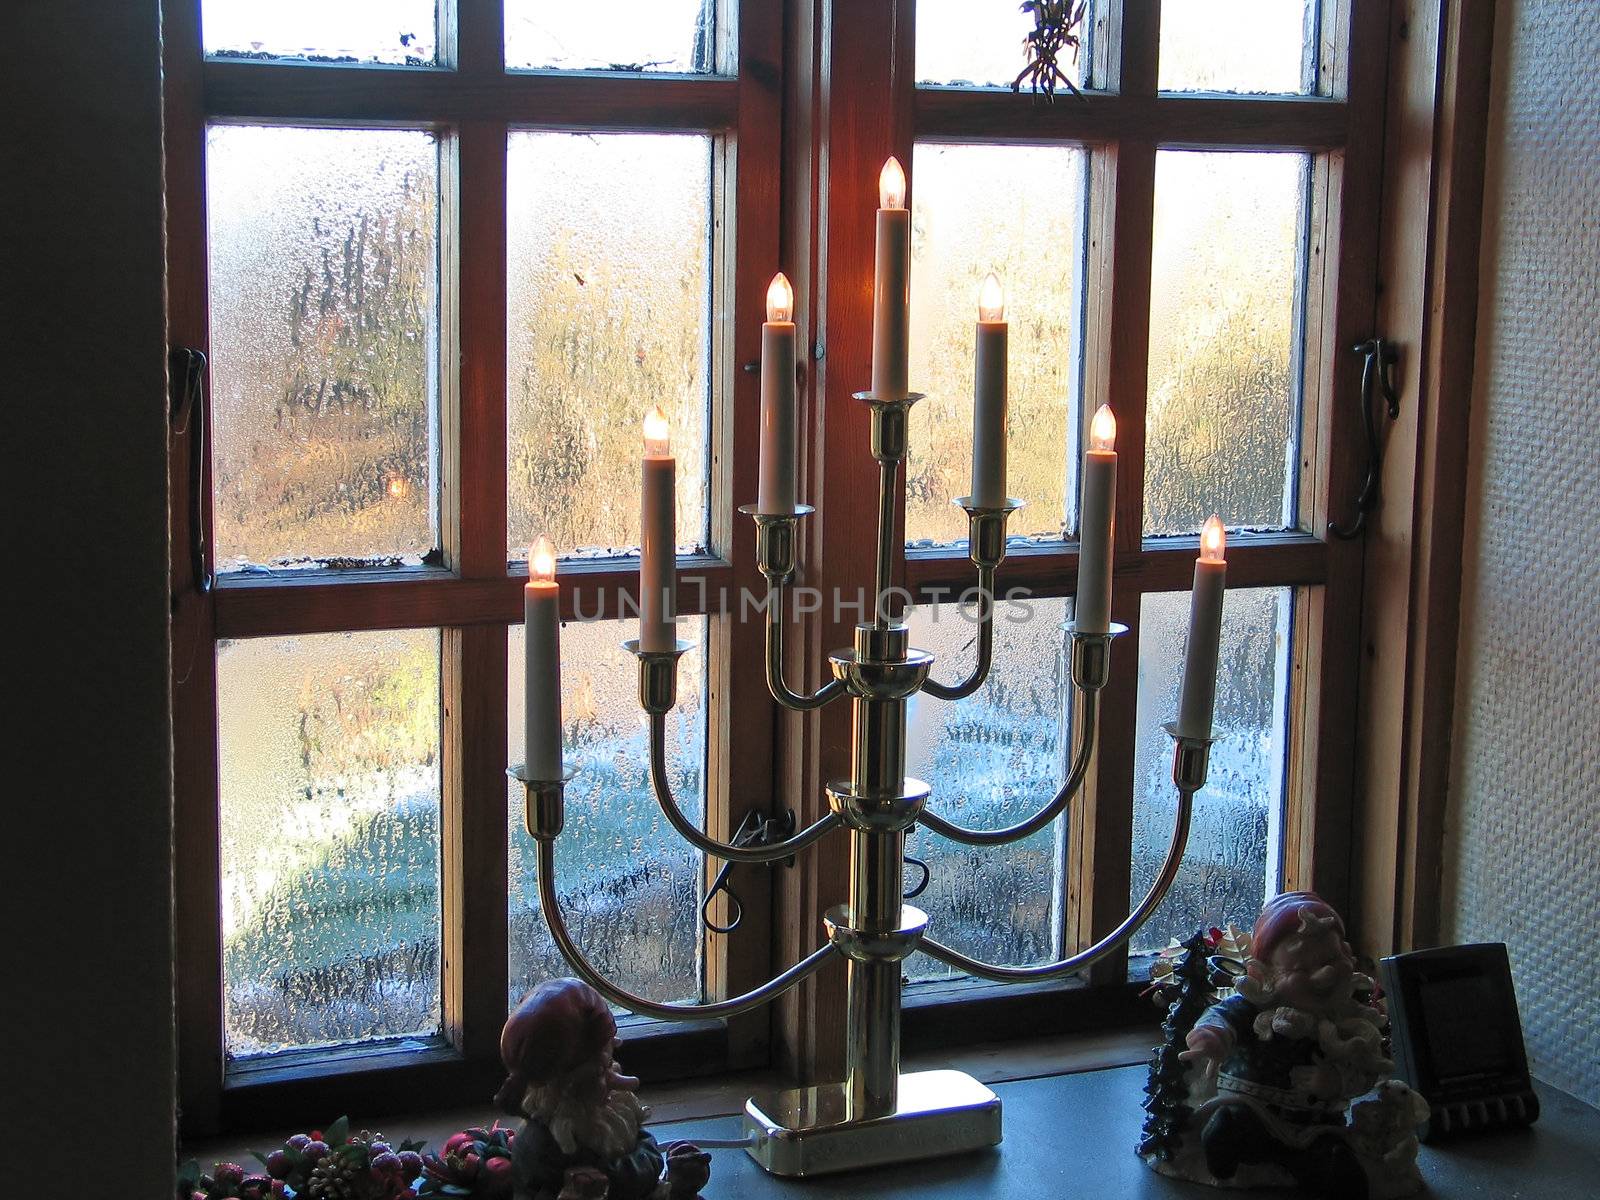 Decorative lights for the new year stand by the window